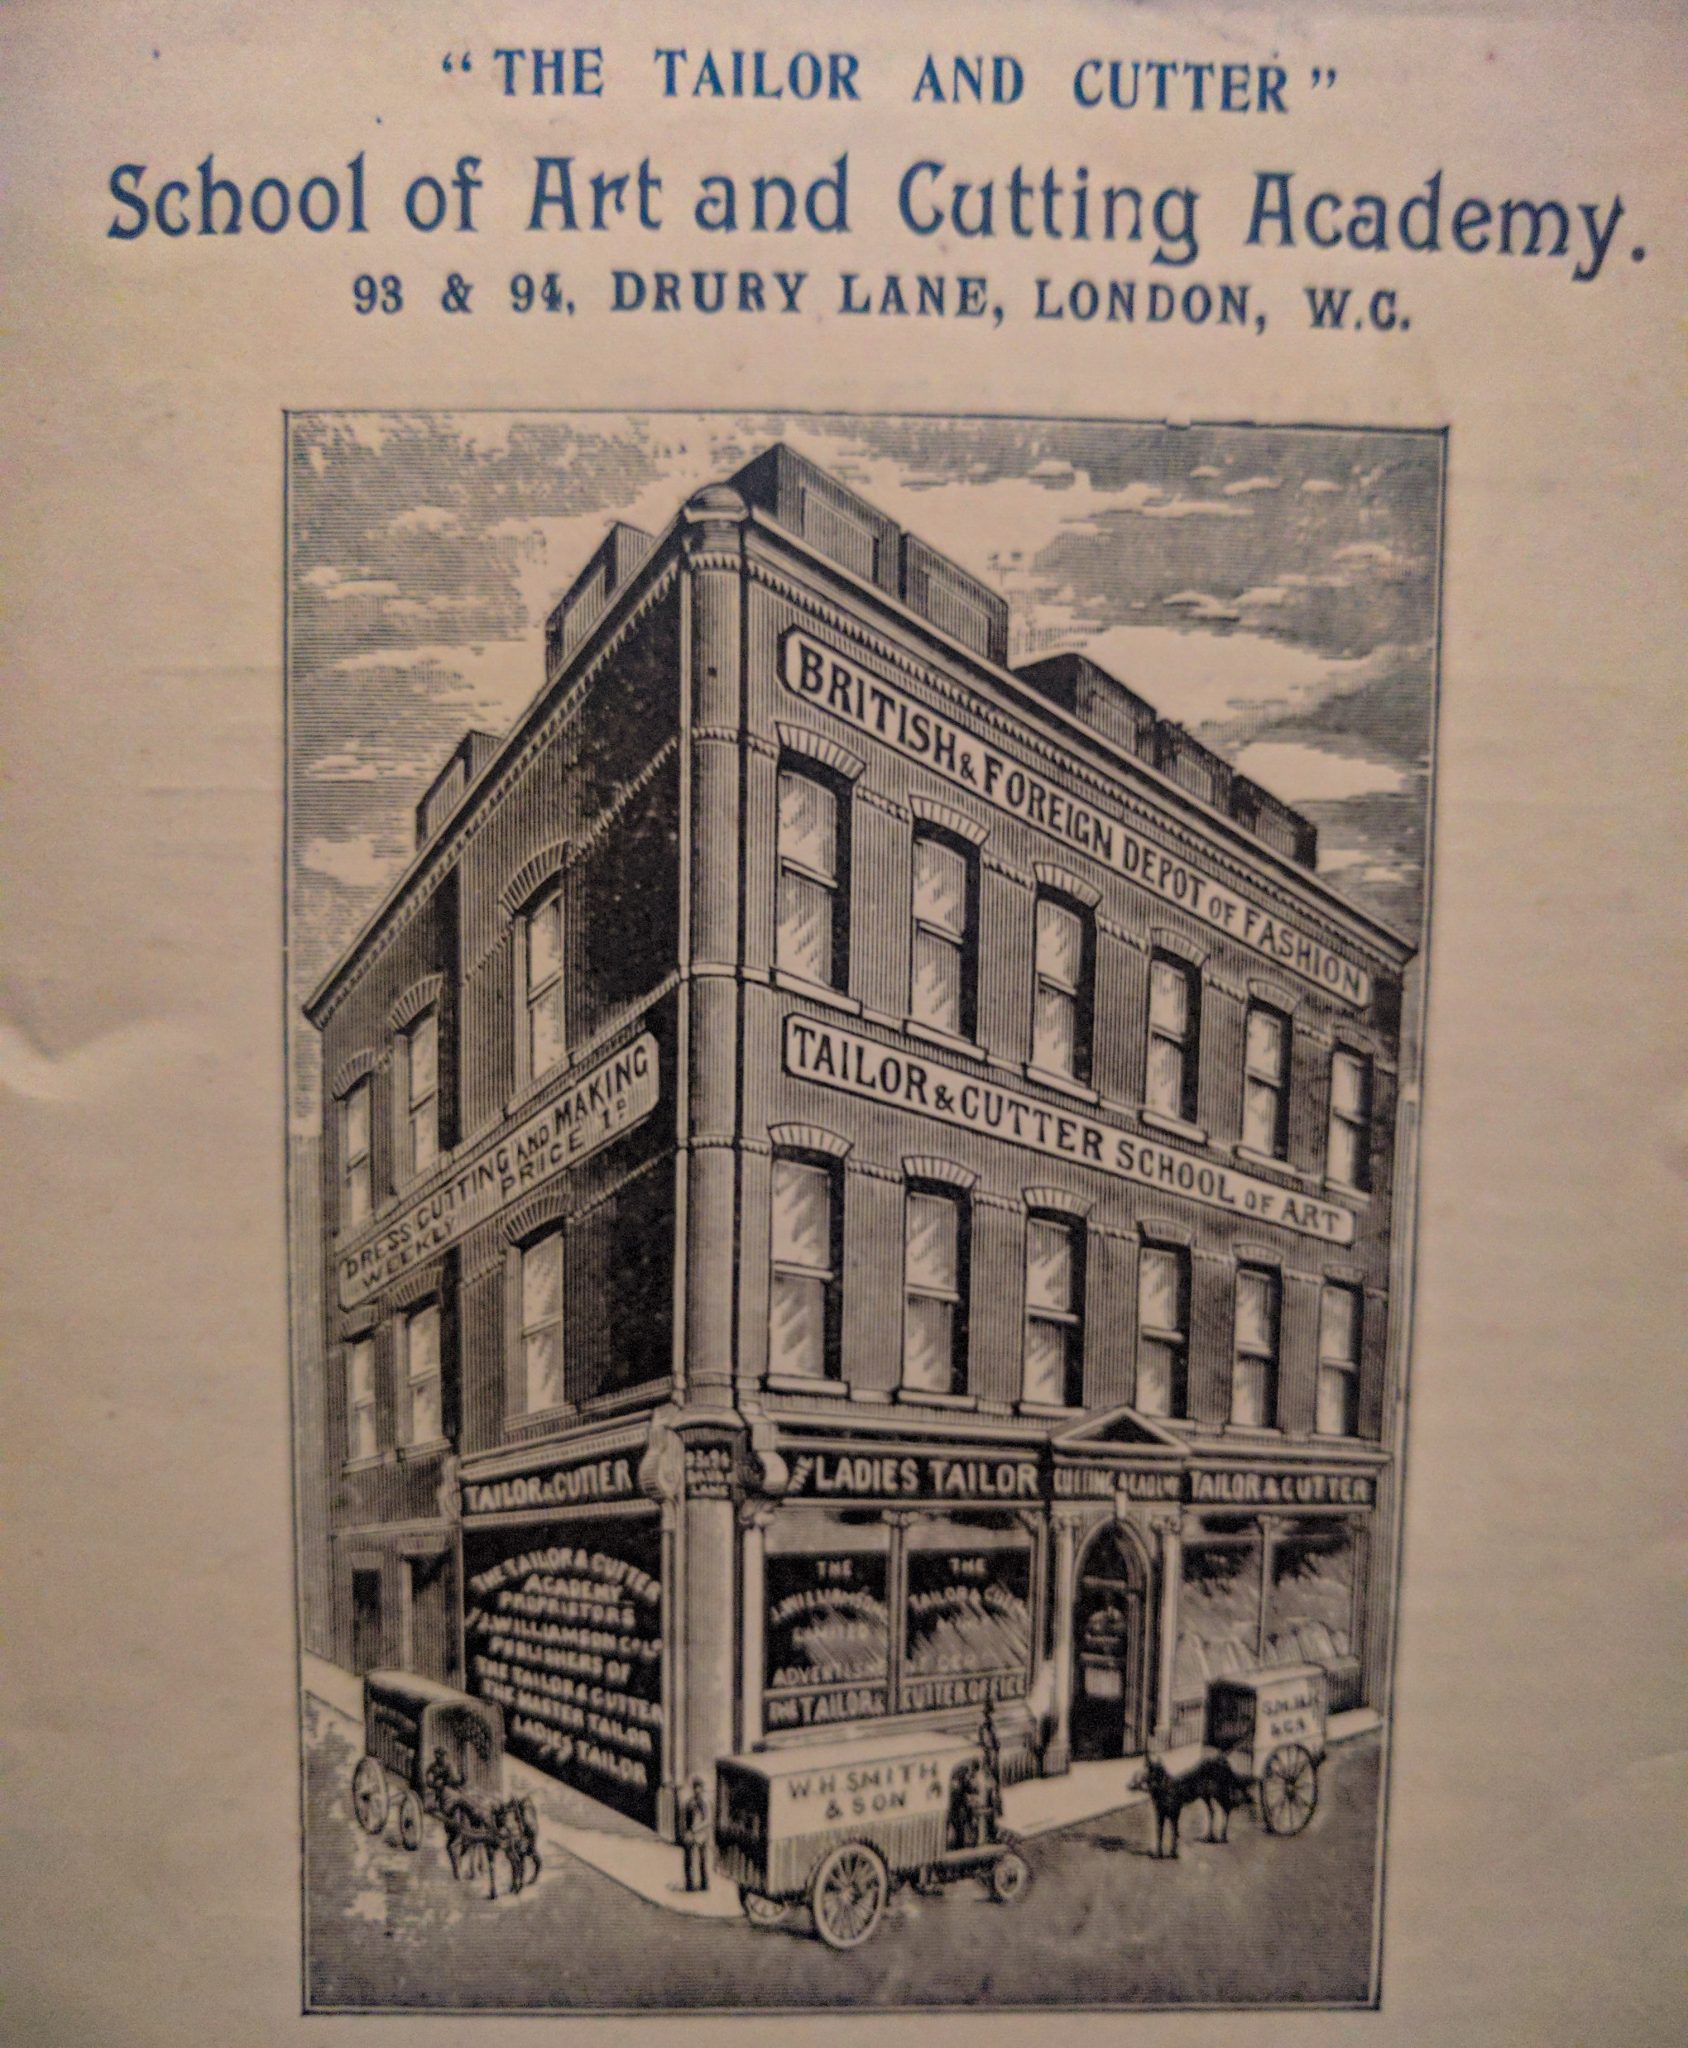 Tailor and Cutter School of Art and Cutting Academy